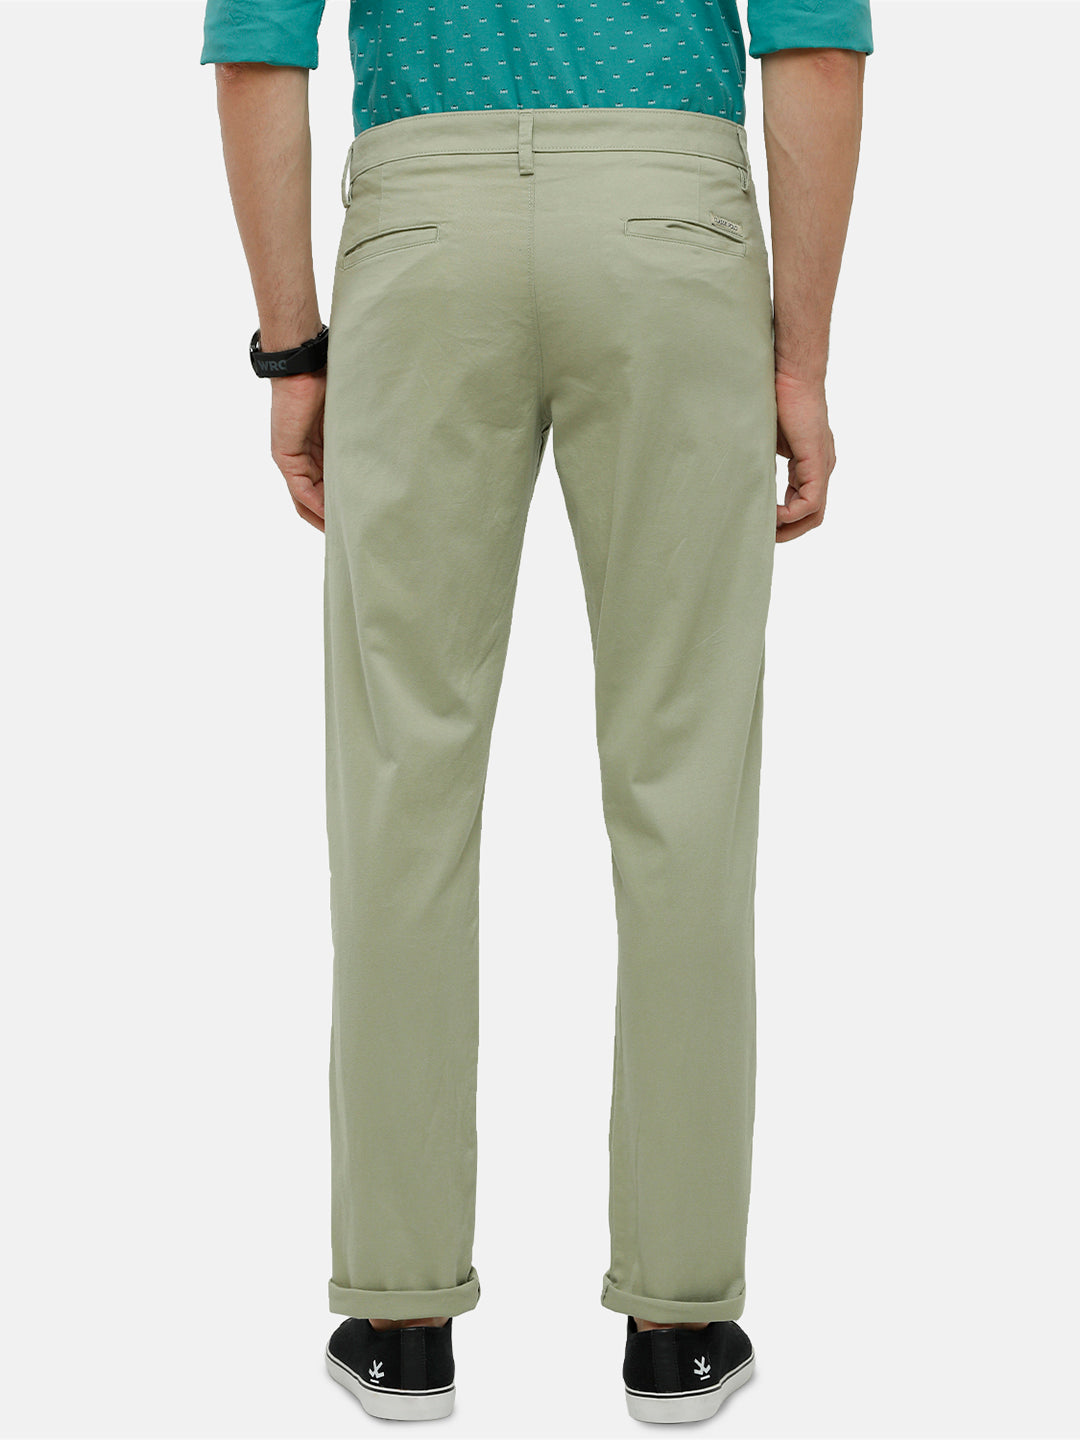 Buy mens track pants pista color (pack of 2) Online In India At Discounted  Prices